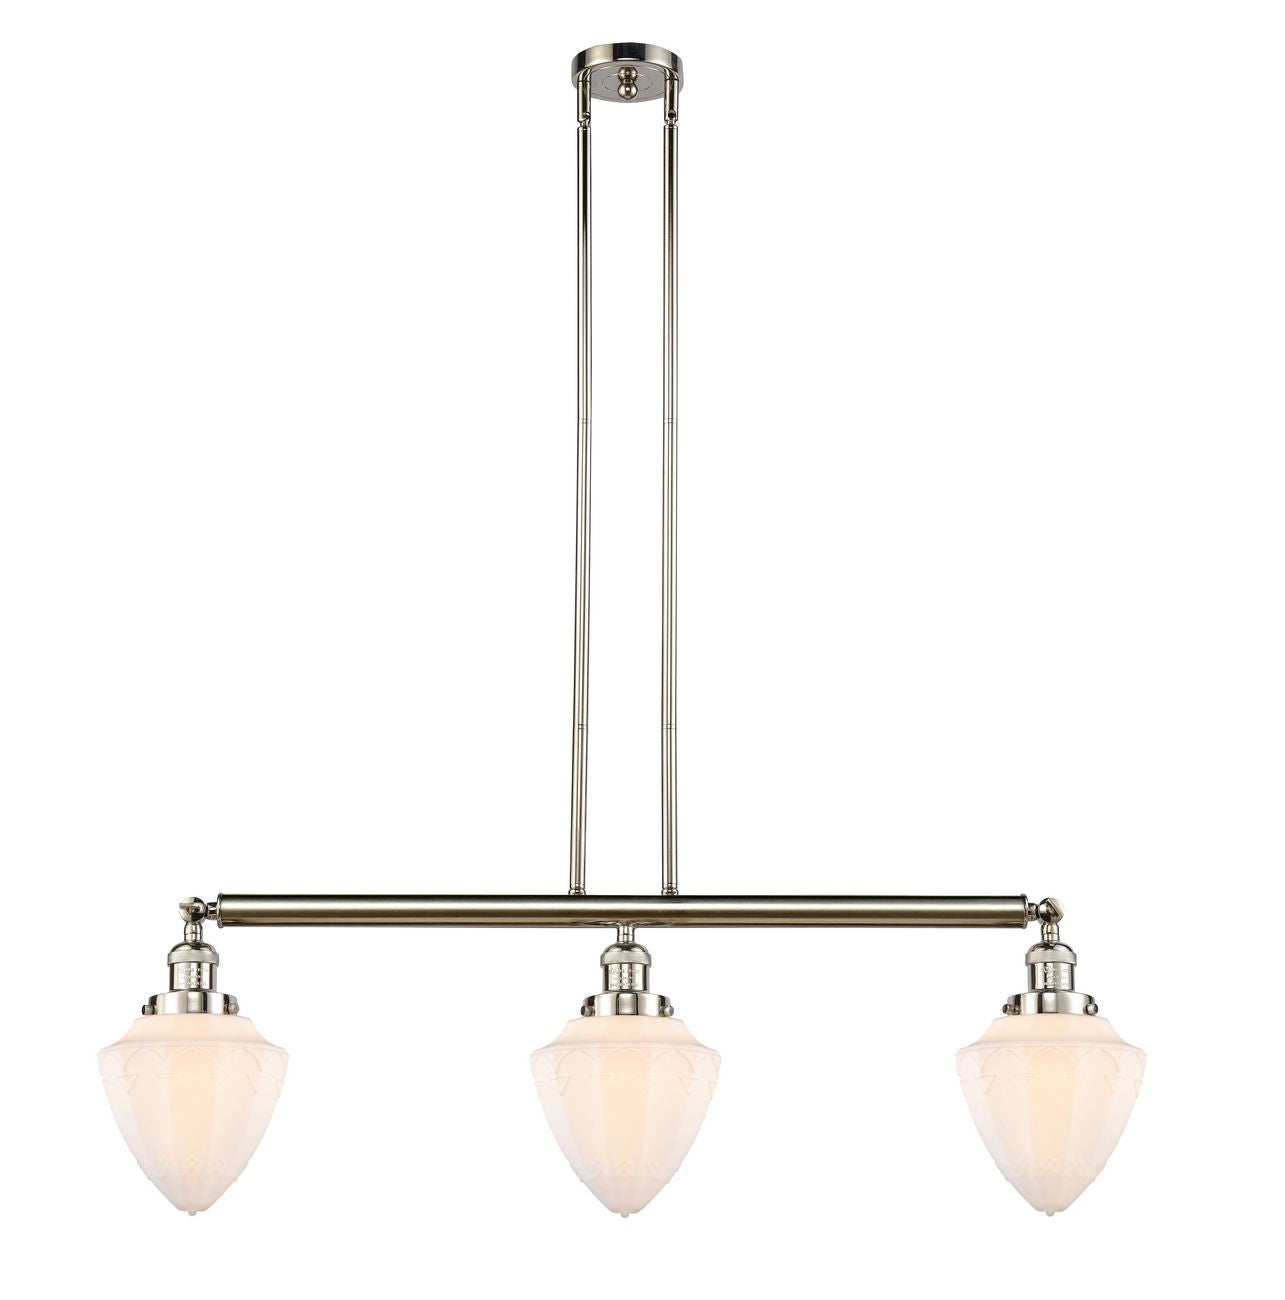 213-PN-G661-7 3-Light 38" Polished Nickel Island Light - Matte White Cased Small Bullet Glass - LED Bulb - Dimmensions: 38 x 7 x 15.25<br>Minimum Height : 24.25<br>Maximum Height : 48.25 - Sloped Ceiling Compatible: Yes